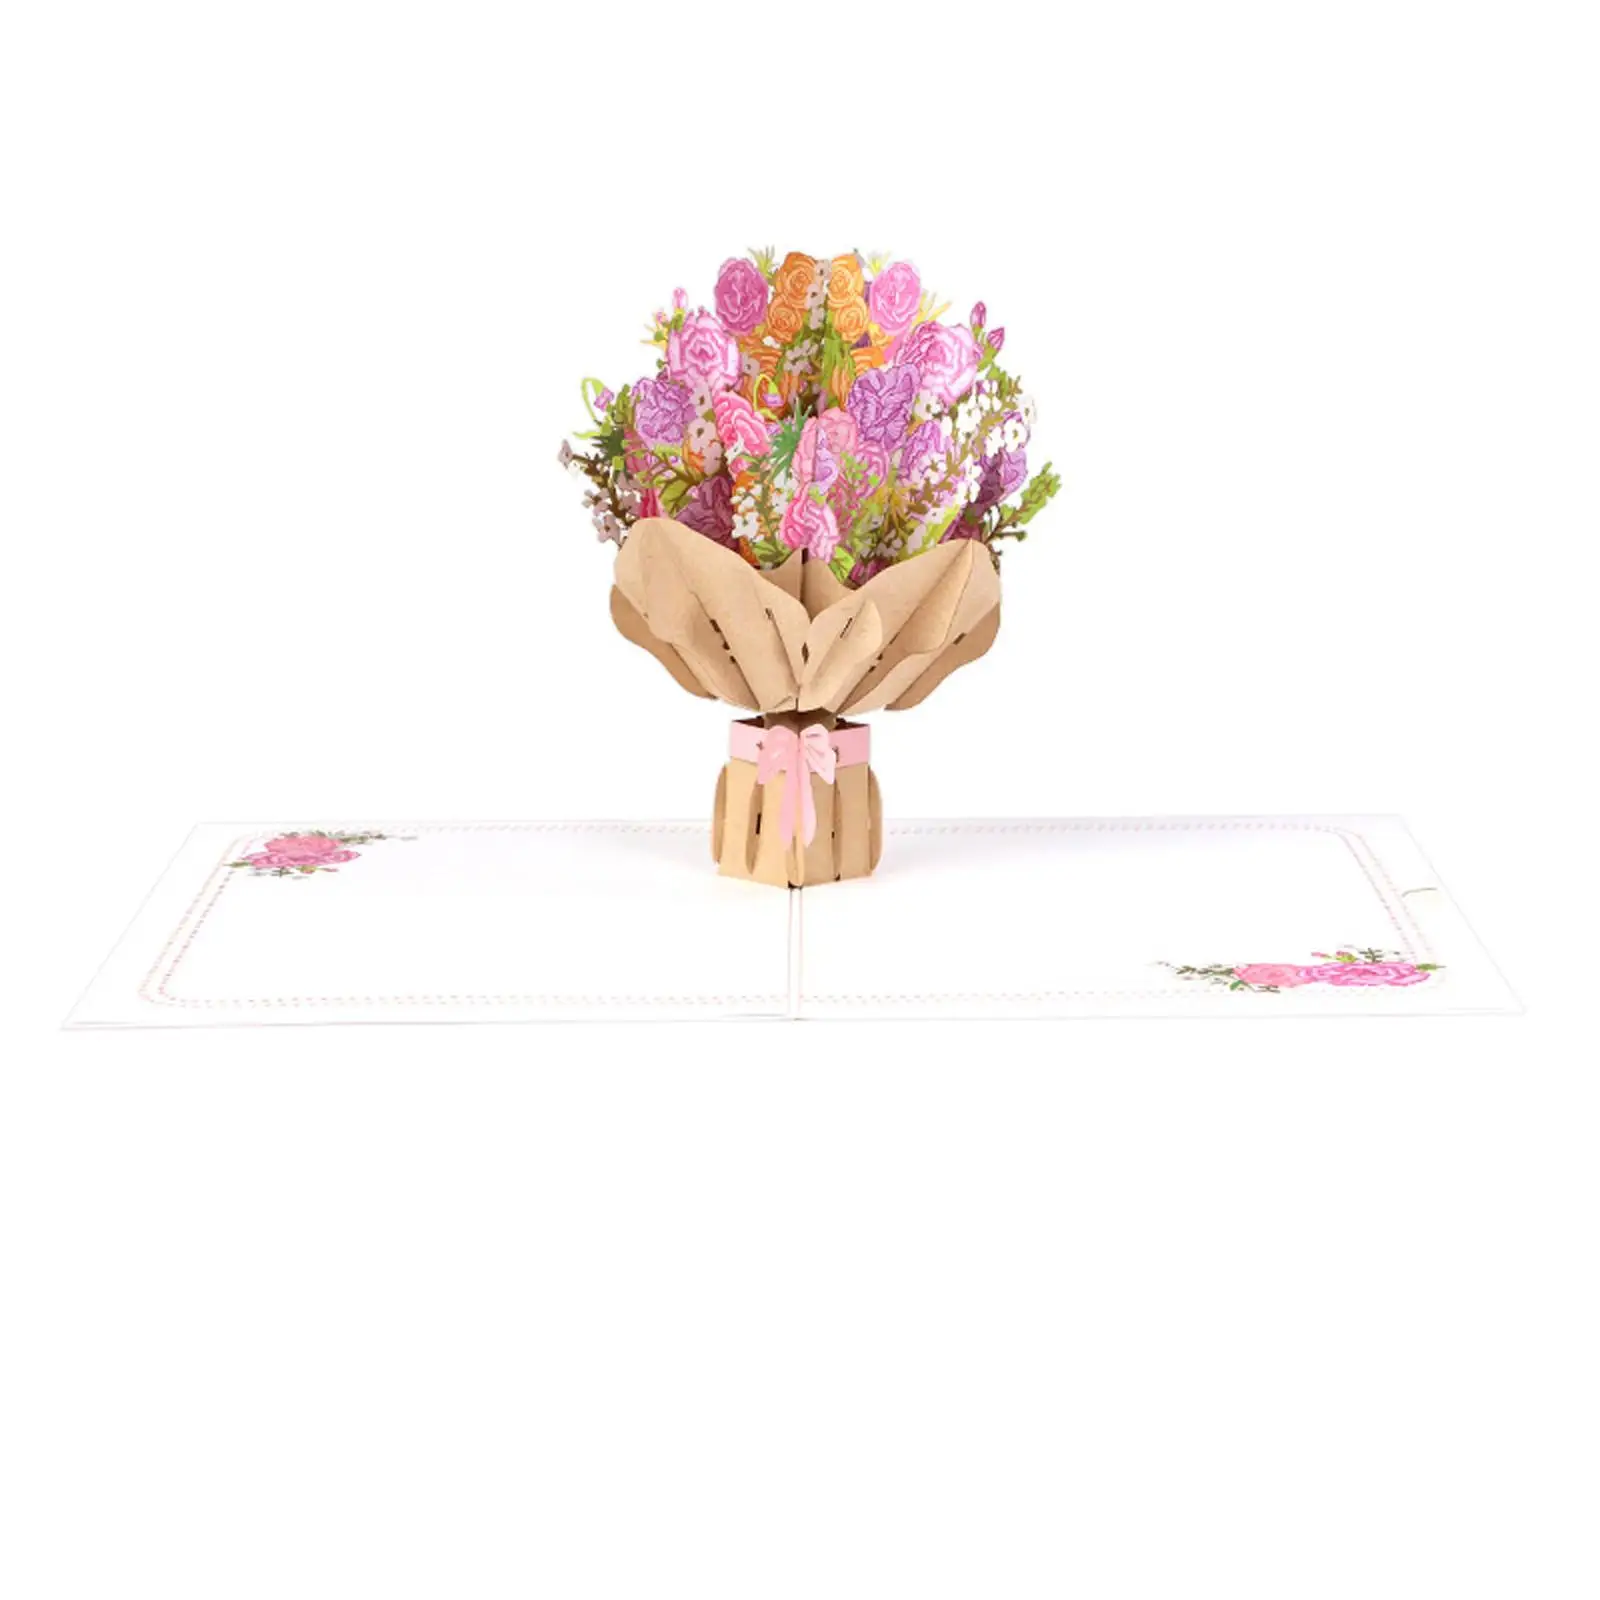 Flower Bouquet Pop up Card with Envelopes Greeting Card for Birthday Holiday